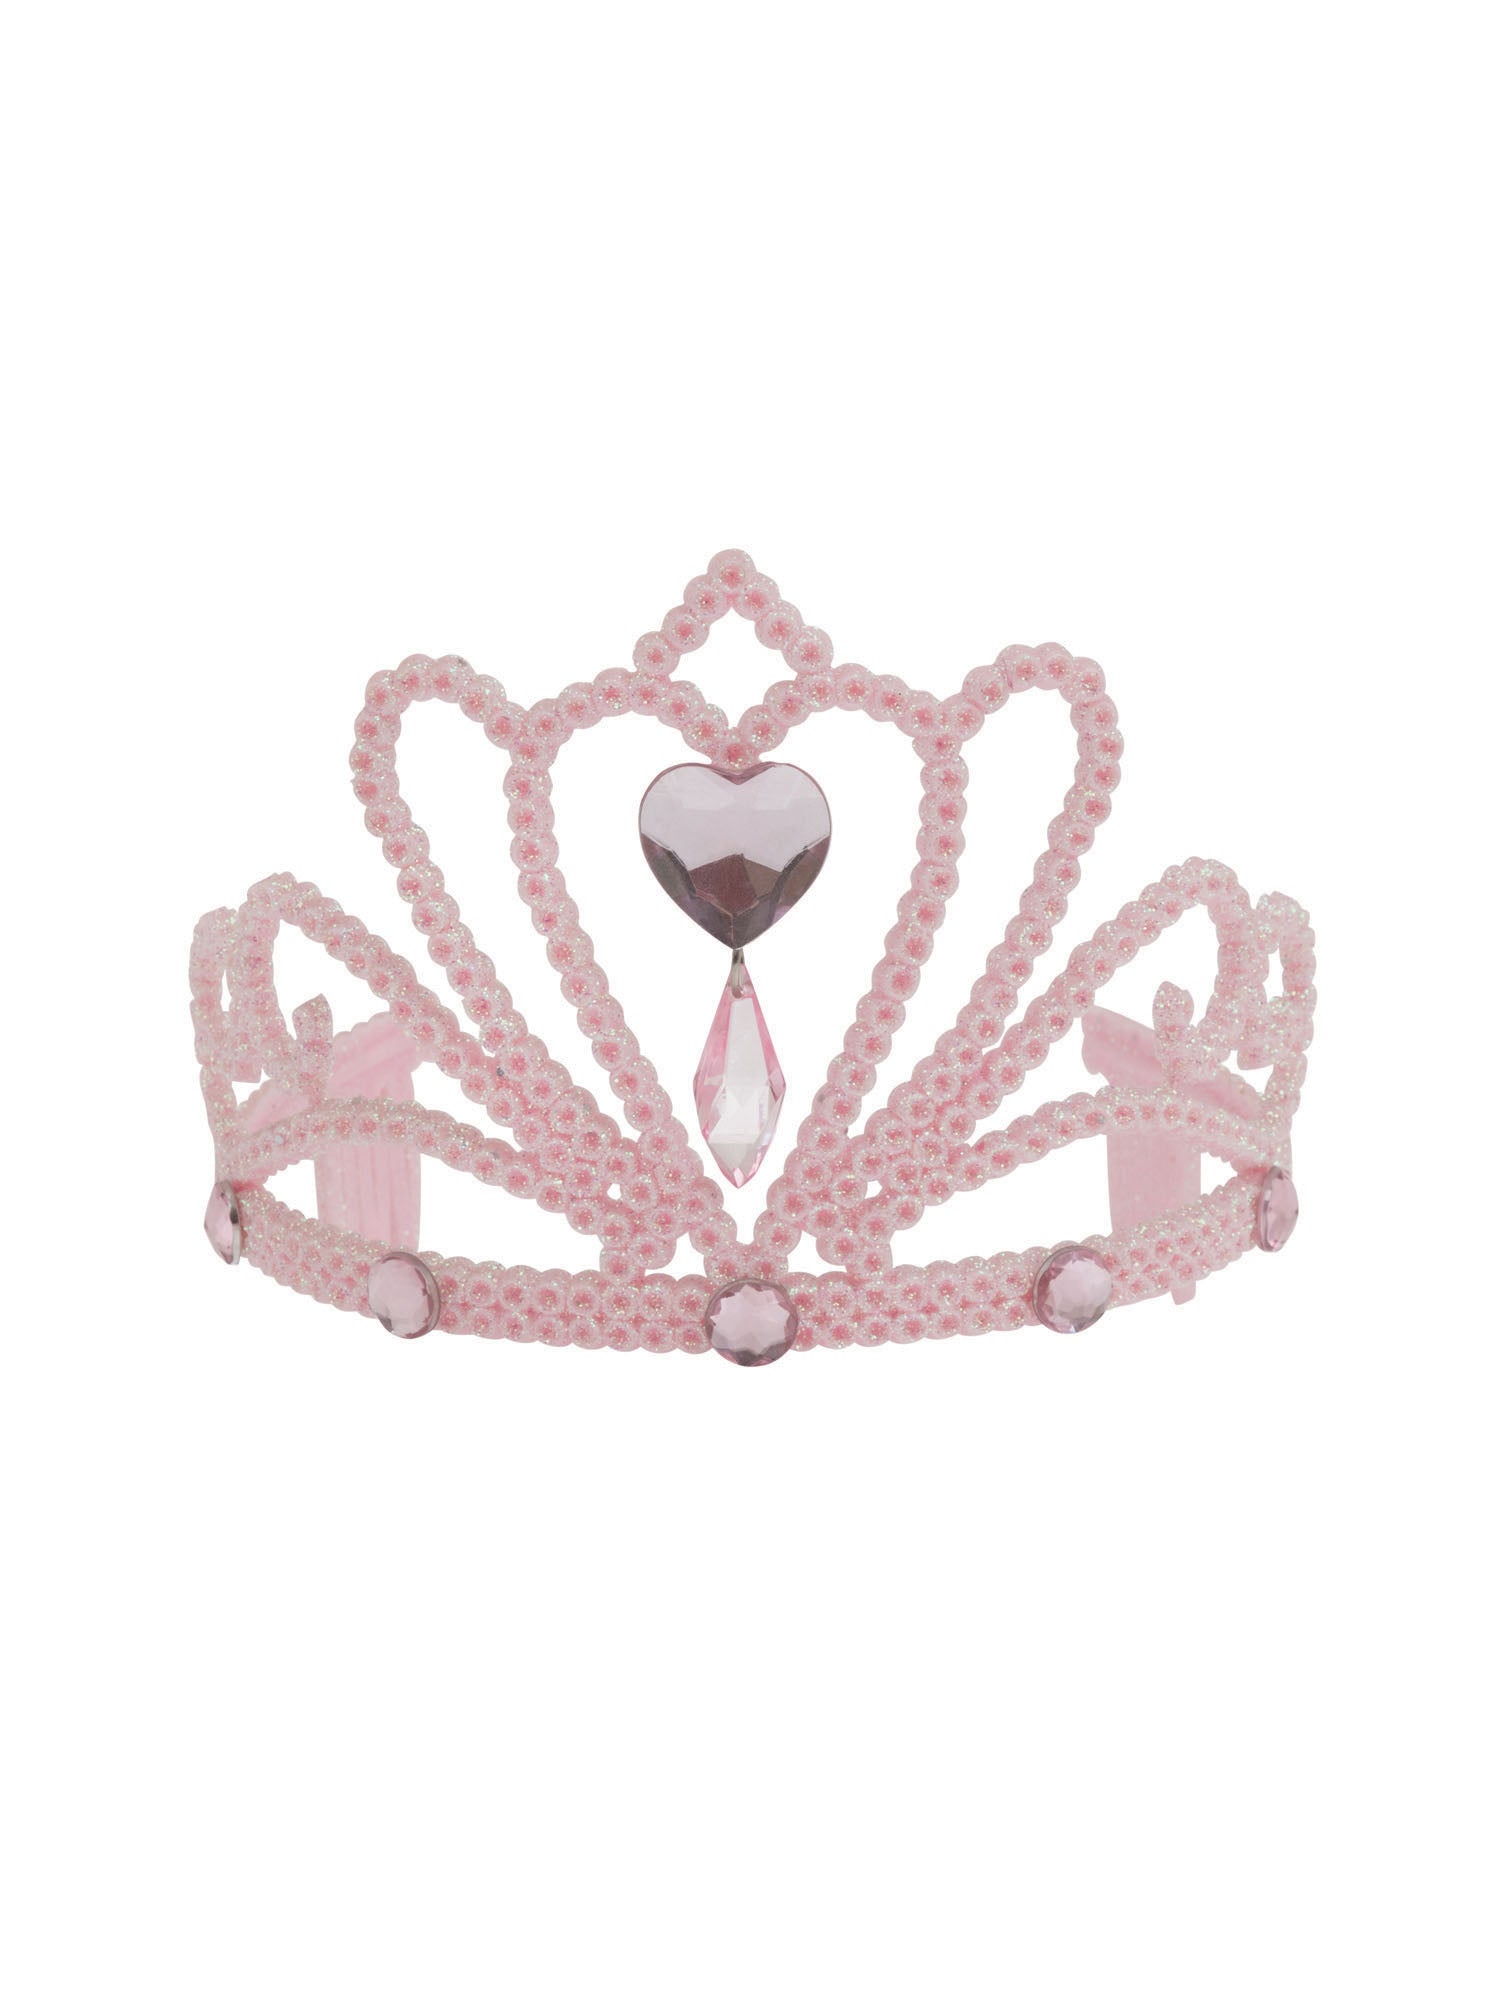 Tiara, Pink, Generic, Accessories, One Size, Front